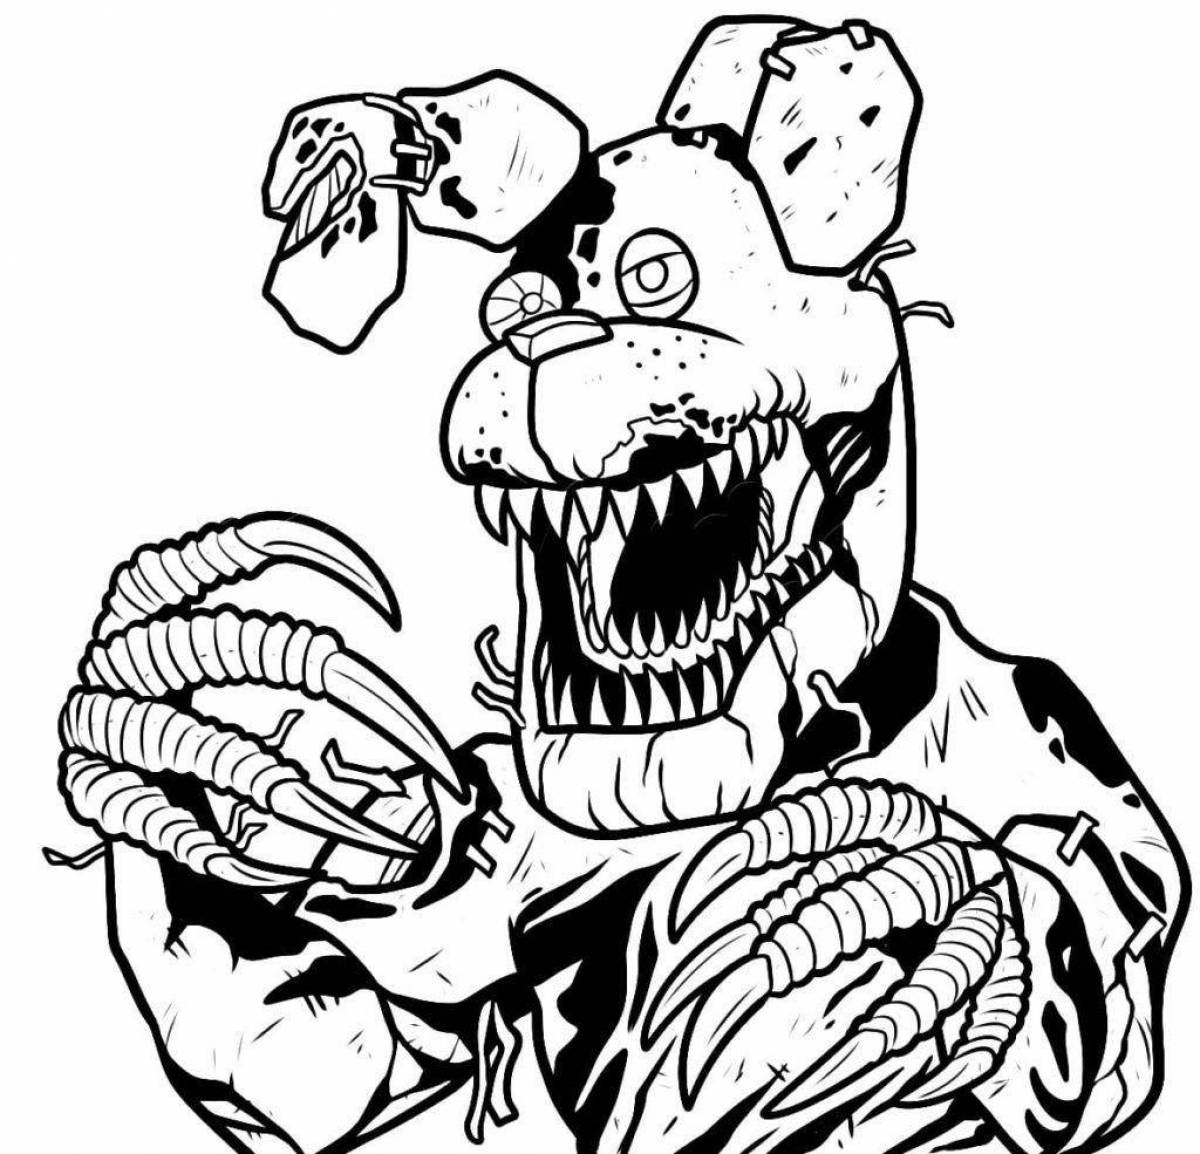 Monty's funny animatronic coloring book